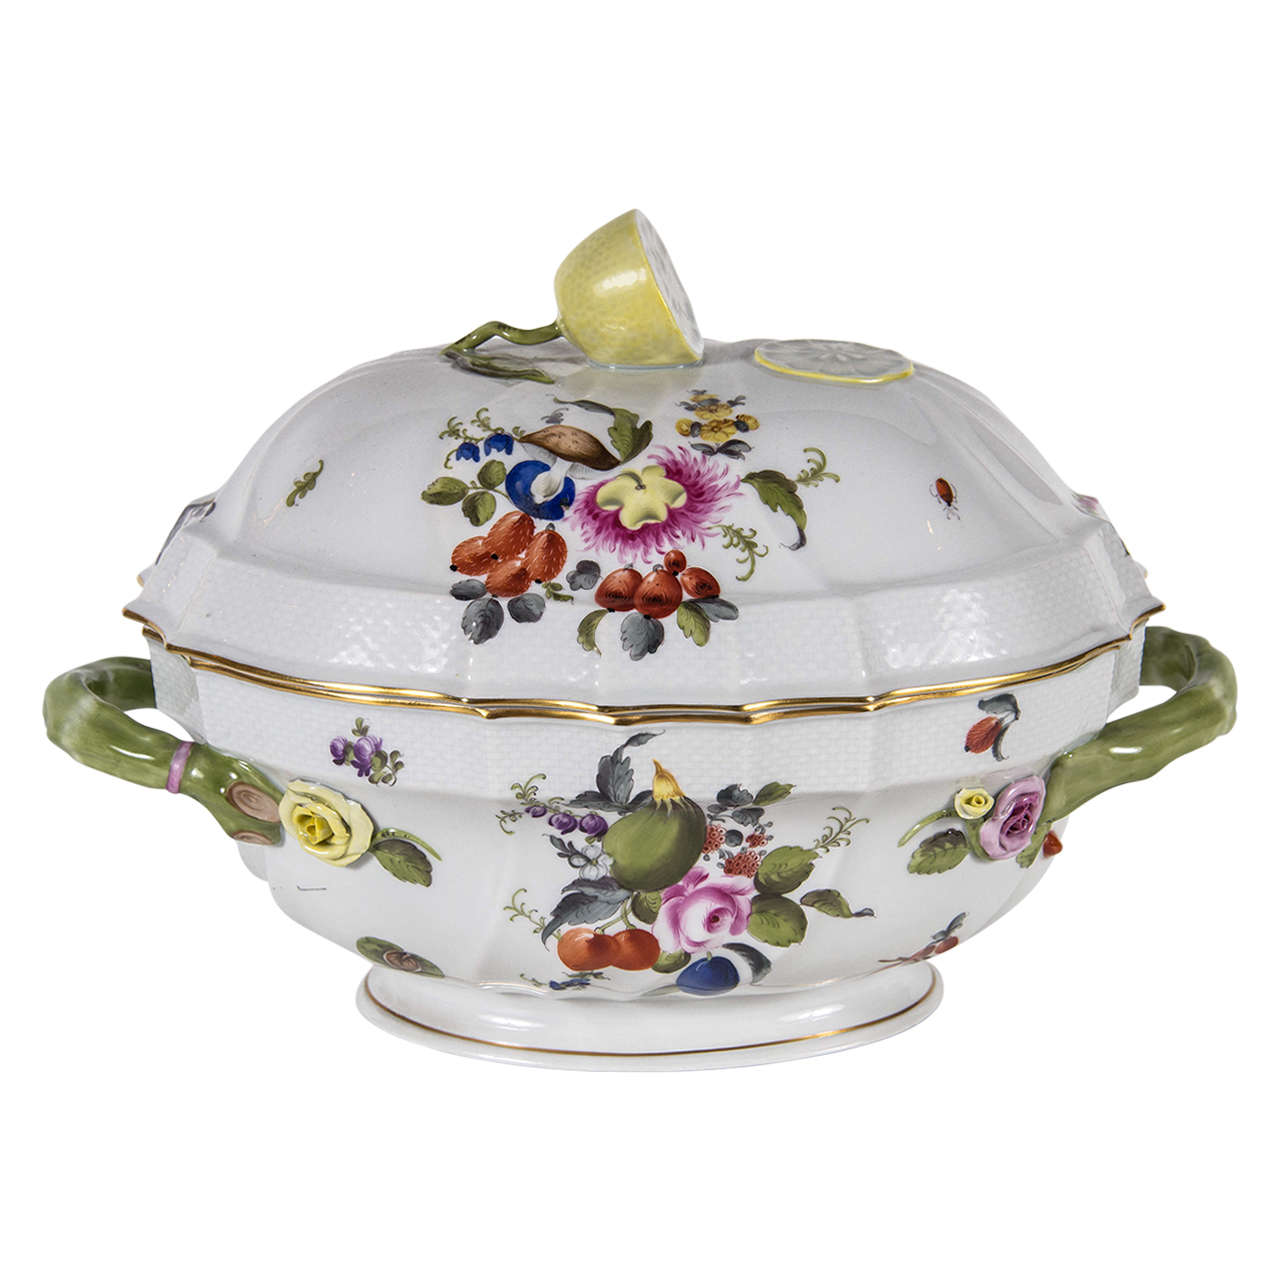 Exquisite and Fine Porcelain Tureen by Herend